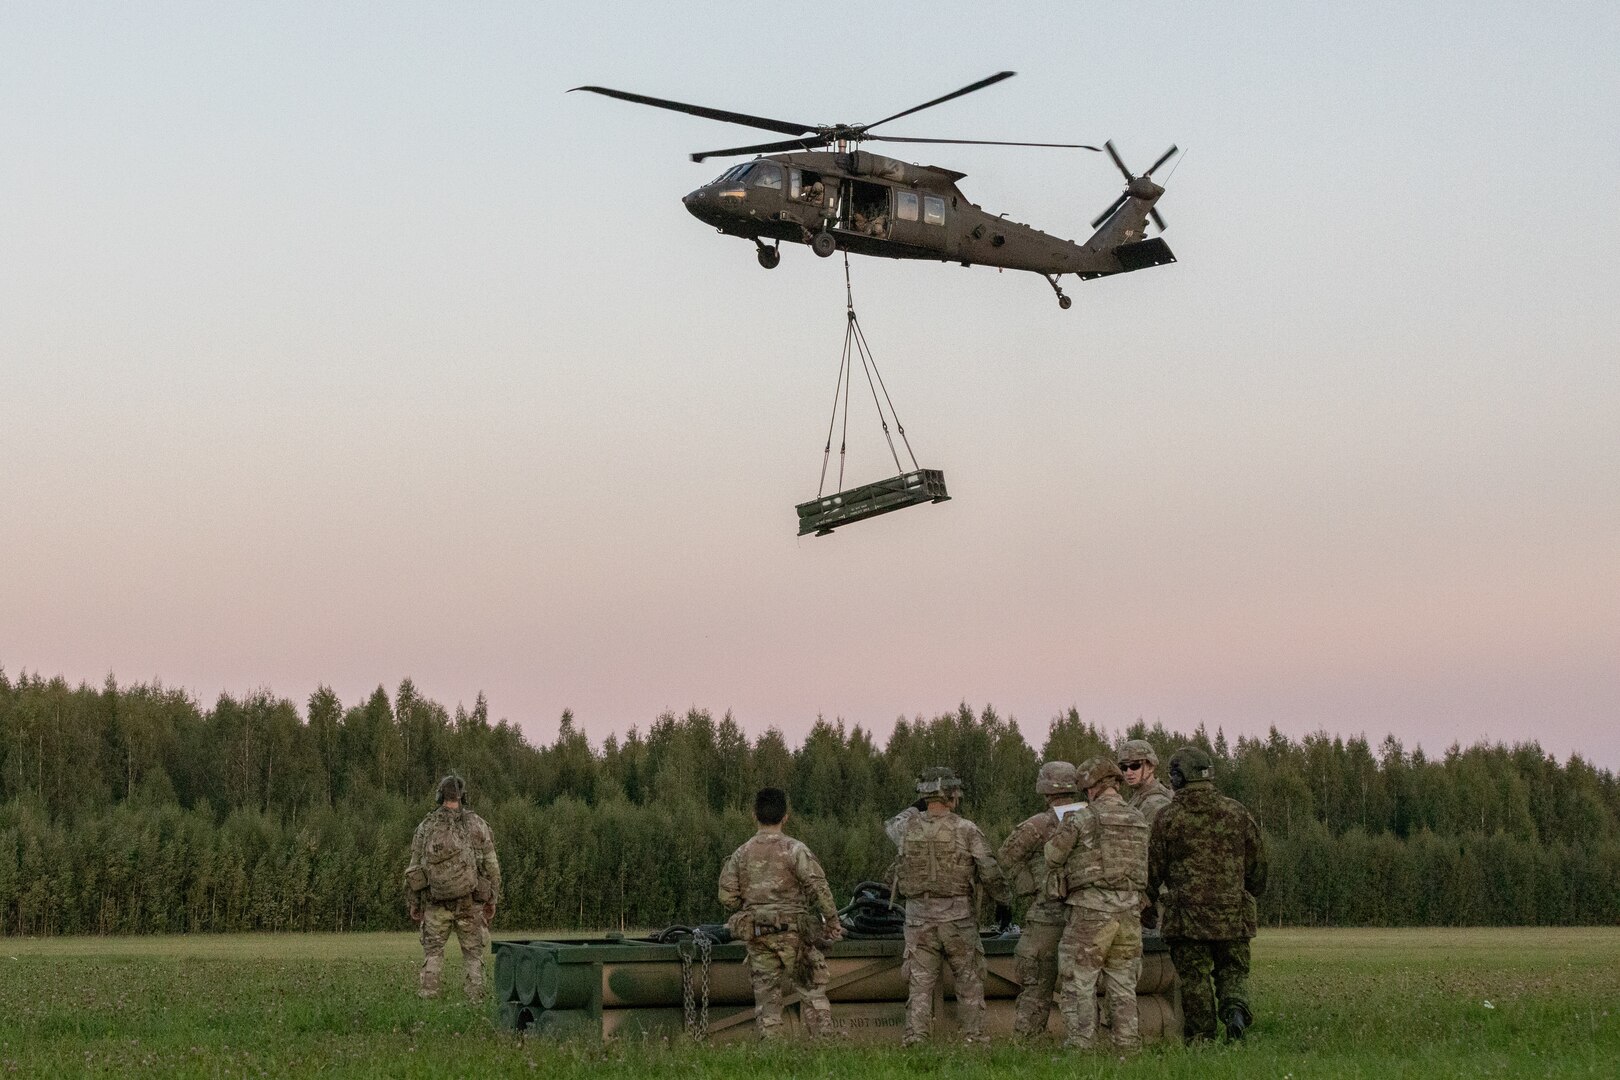 U.S. Army Soldiers assigned to 1st Battalion, 506th Infantry Regiment "Red Currahee," 1st Infantry Brigade Combat Team, 101st Airborne Division (Air Assault); Soldiers with Task Force Knighthawk, 3rd Combat Aviation Brigade, both supporting 4th Infantry Division, conduct sling-load training in Voru, Estonia, Sept. 6. The training exercise demonstrated the capability to rapidly deploy High-Mobility Artillery Rocket System ammunition anywhere across the Baltics. The 4th Inf. Div.'s mission in Europe is to engage in multinational training and exercises across the continent, working alongside NATO allies and regional security partners to provide combat-credible forces to V Corps, America’s forward deployed corps in Europe. (U.S. Army photo by Capt. H Howey)